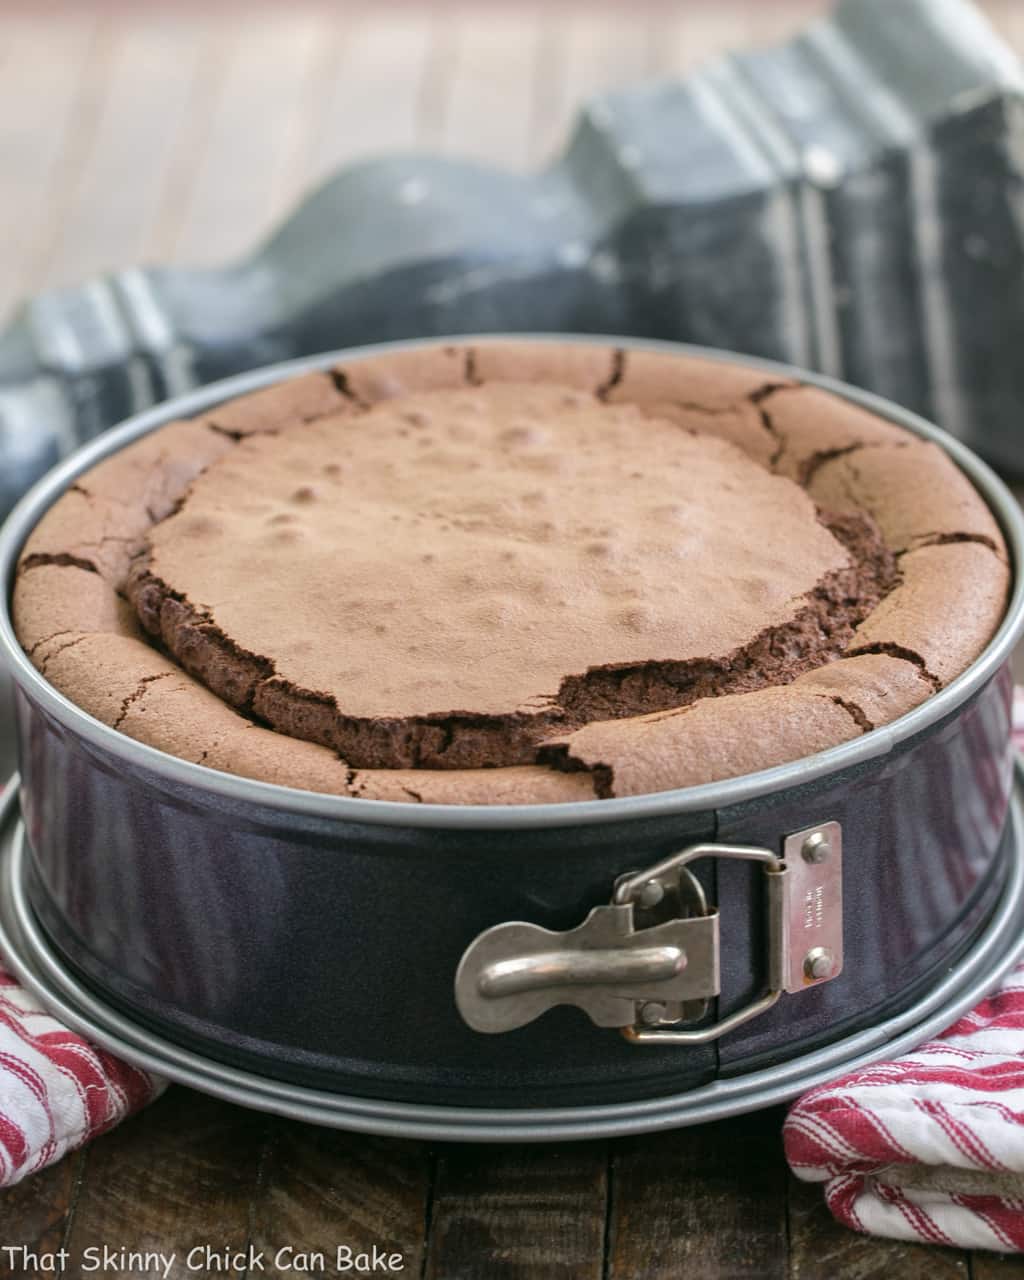 Flourless Chocolate Cake with Ganache Topping in a springform pan before releasing.